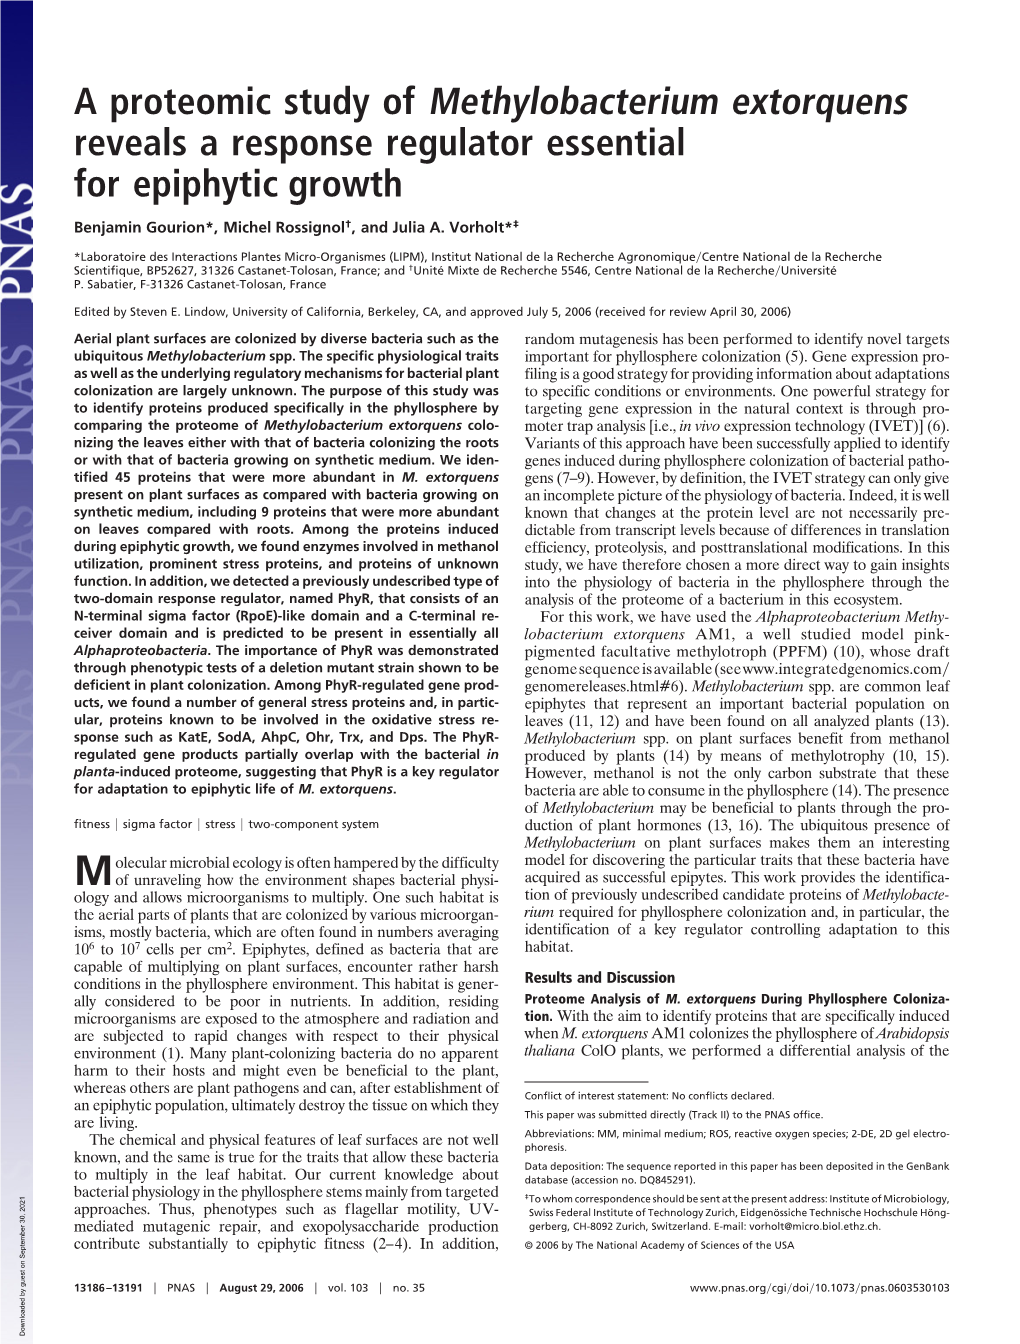 A Proteomic Study of Methylobacterium Extorquens Reveals a Response Regulator Essential for Epiphytic Growth